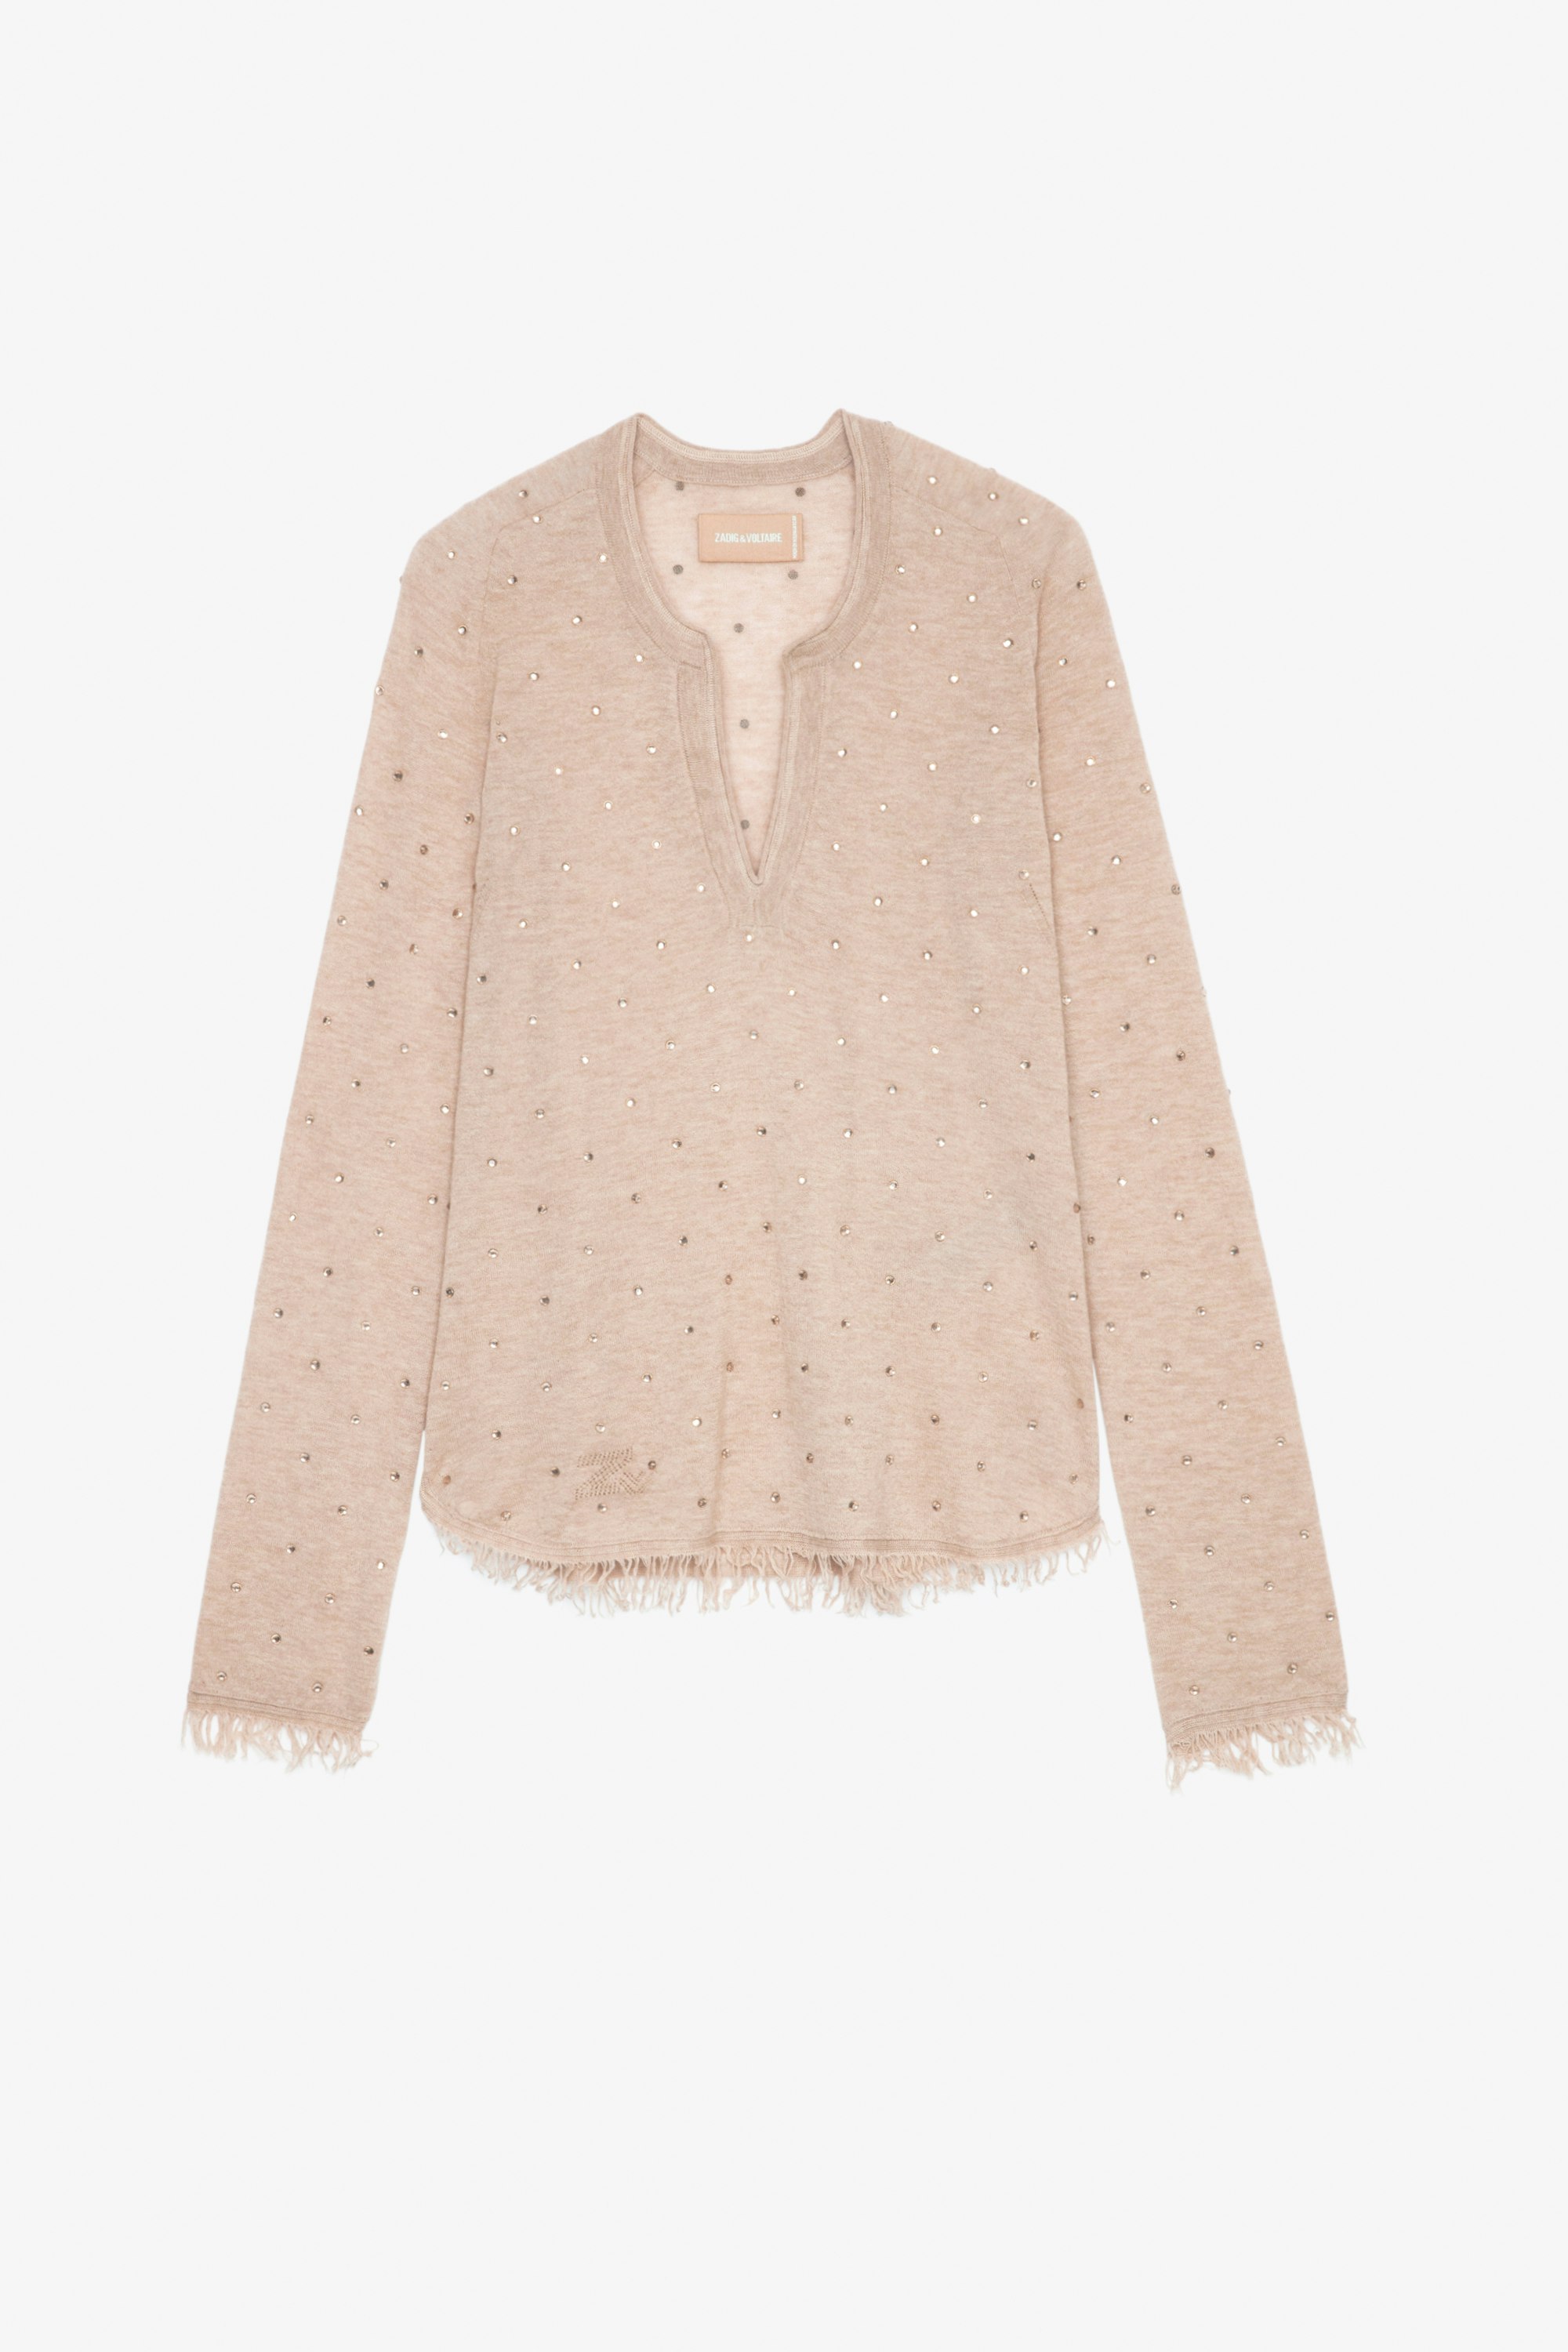 Riviera Cashmere Pullover Women's pale pink cashmere pullover with rhinestones and fringing